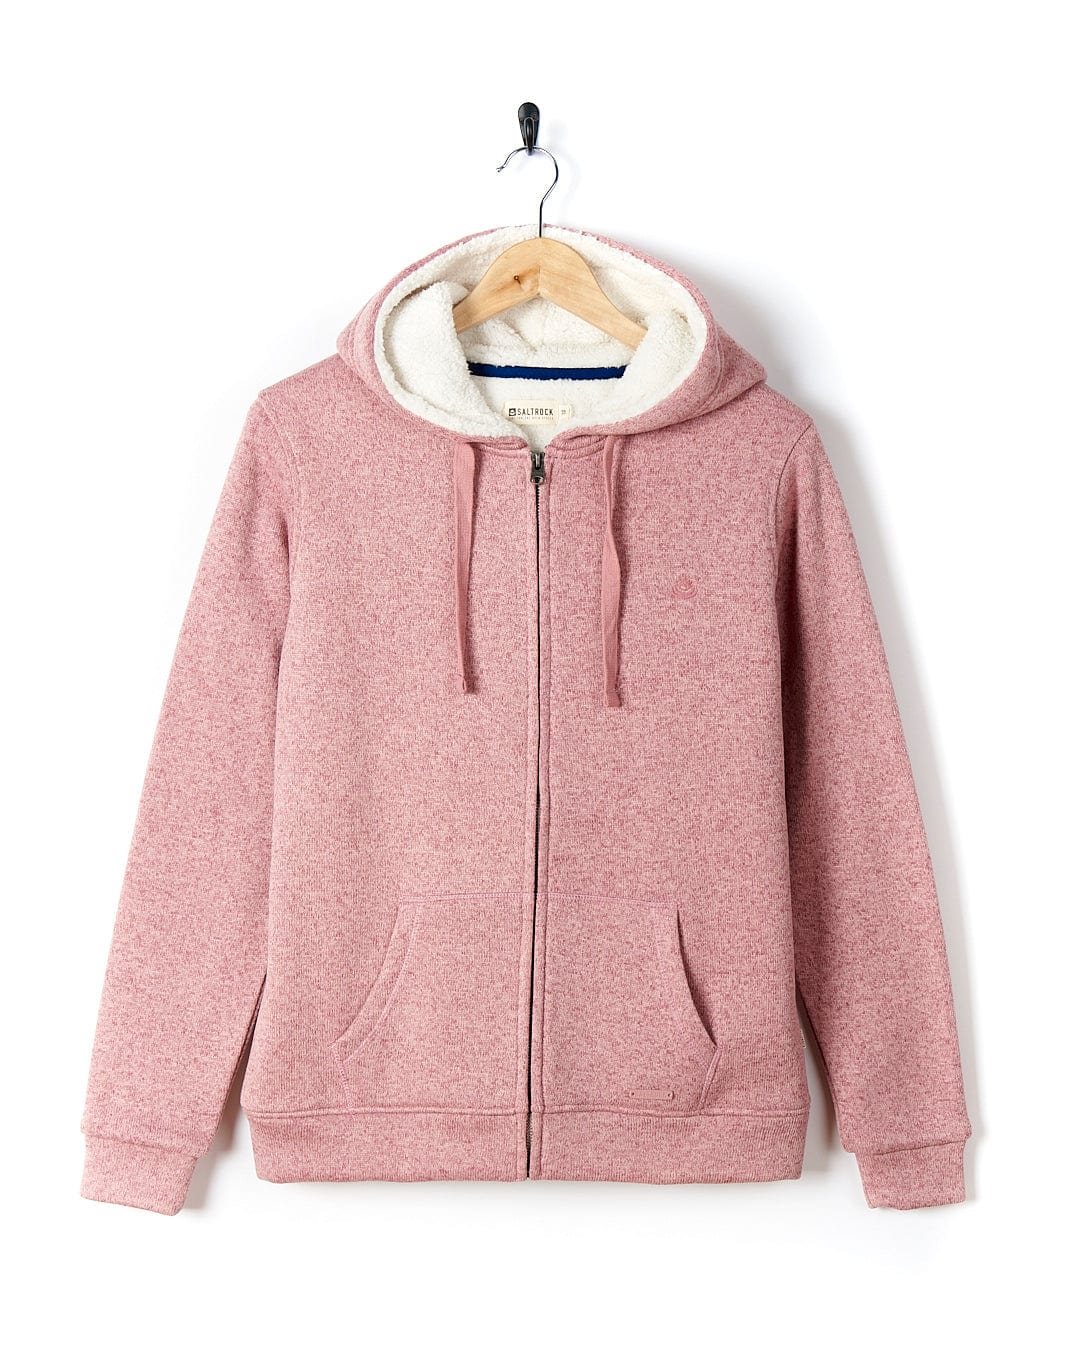 A cozy Galak - Womens Fur Lined Hoody - Pink with a stylish white hood, combining comfort and adventure, by Saltrock.